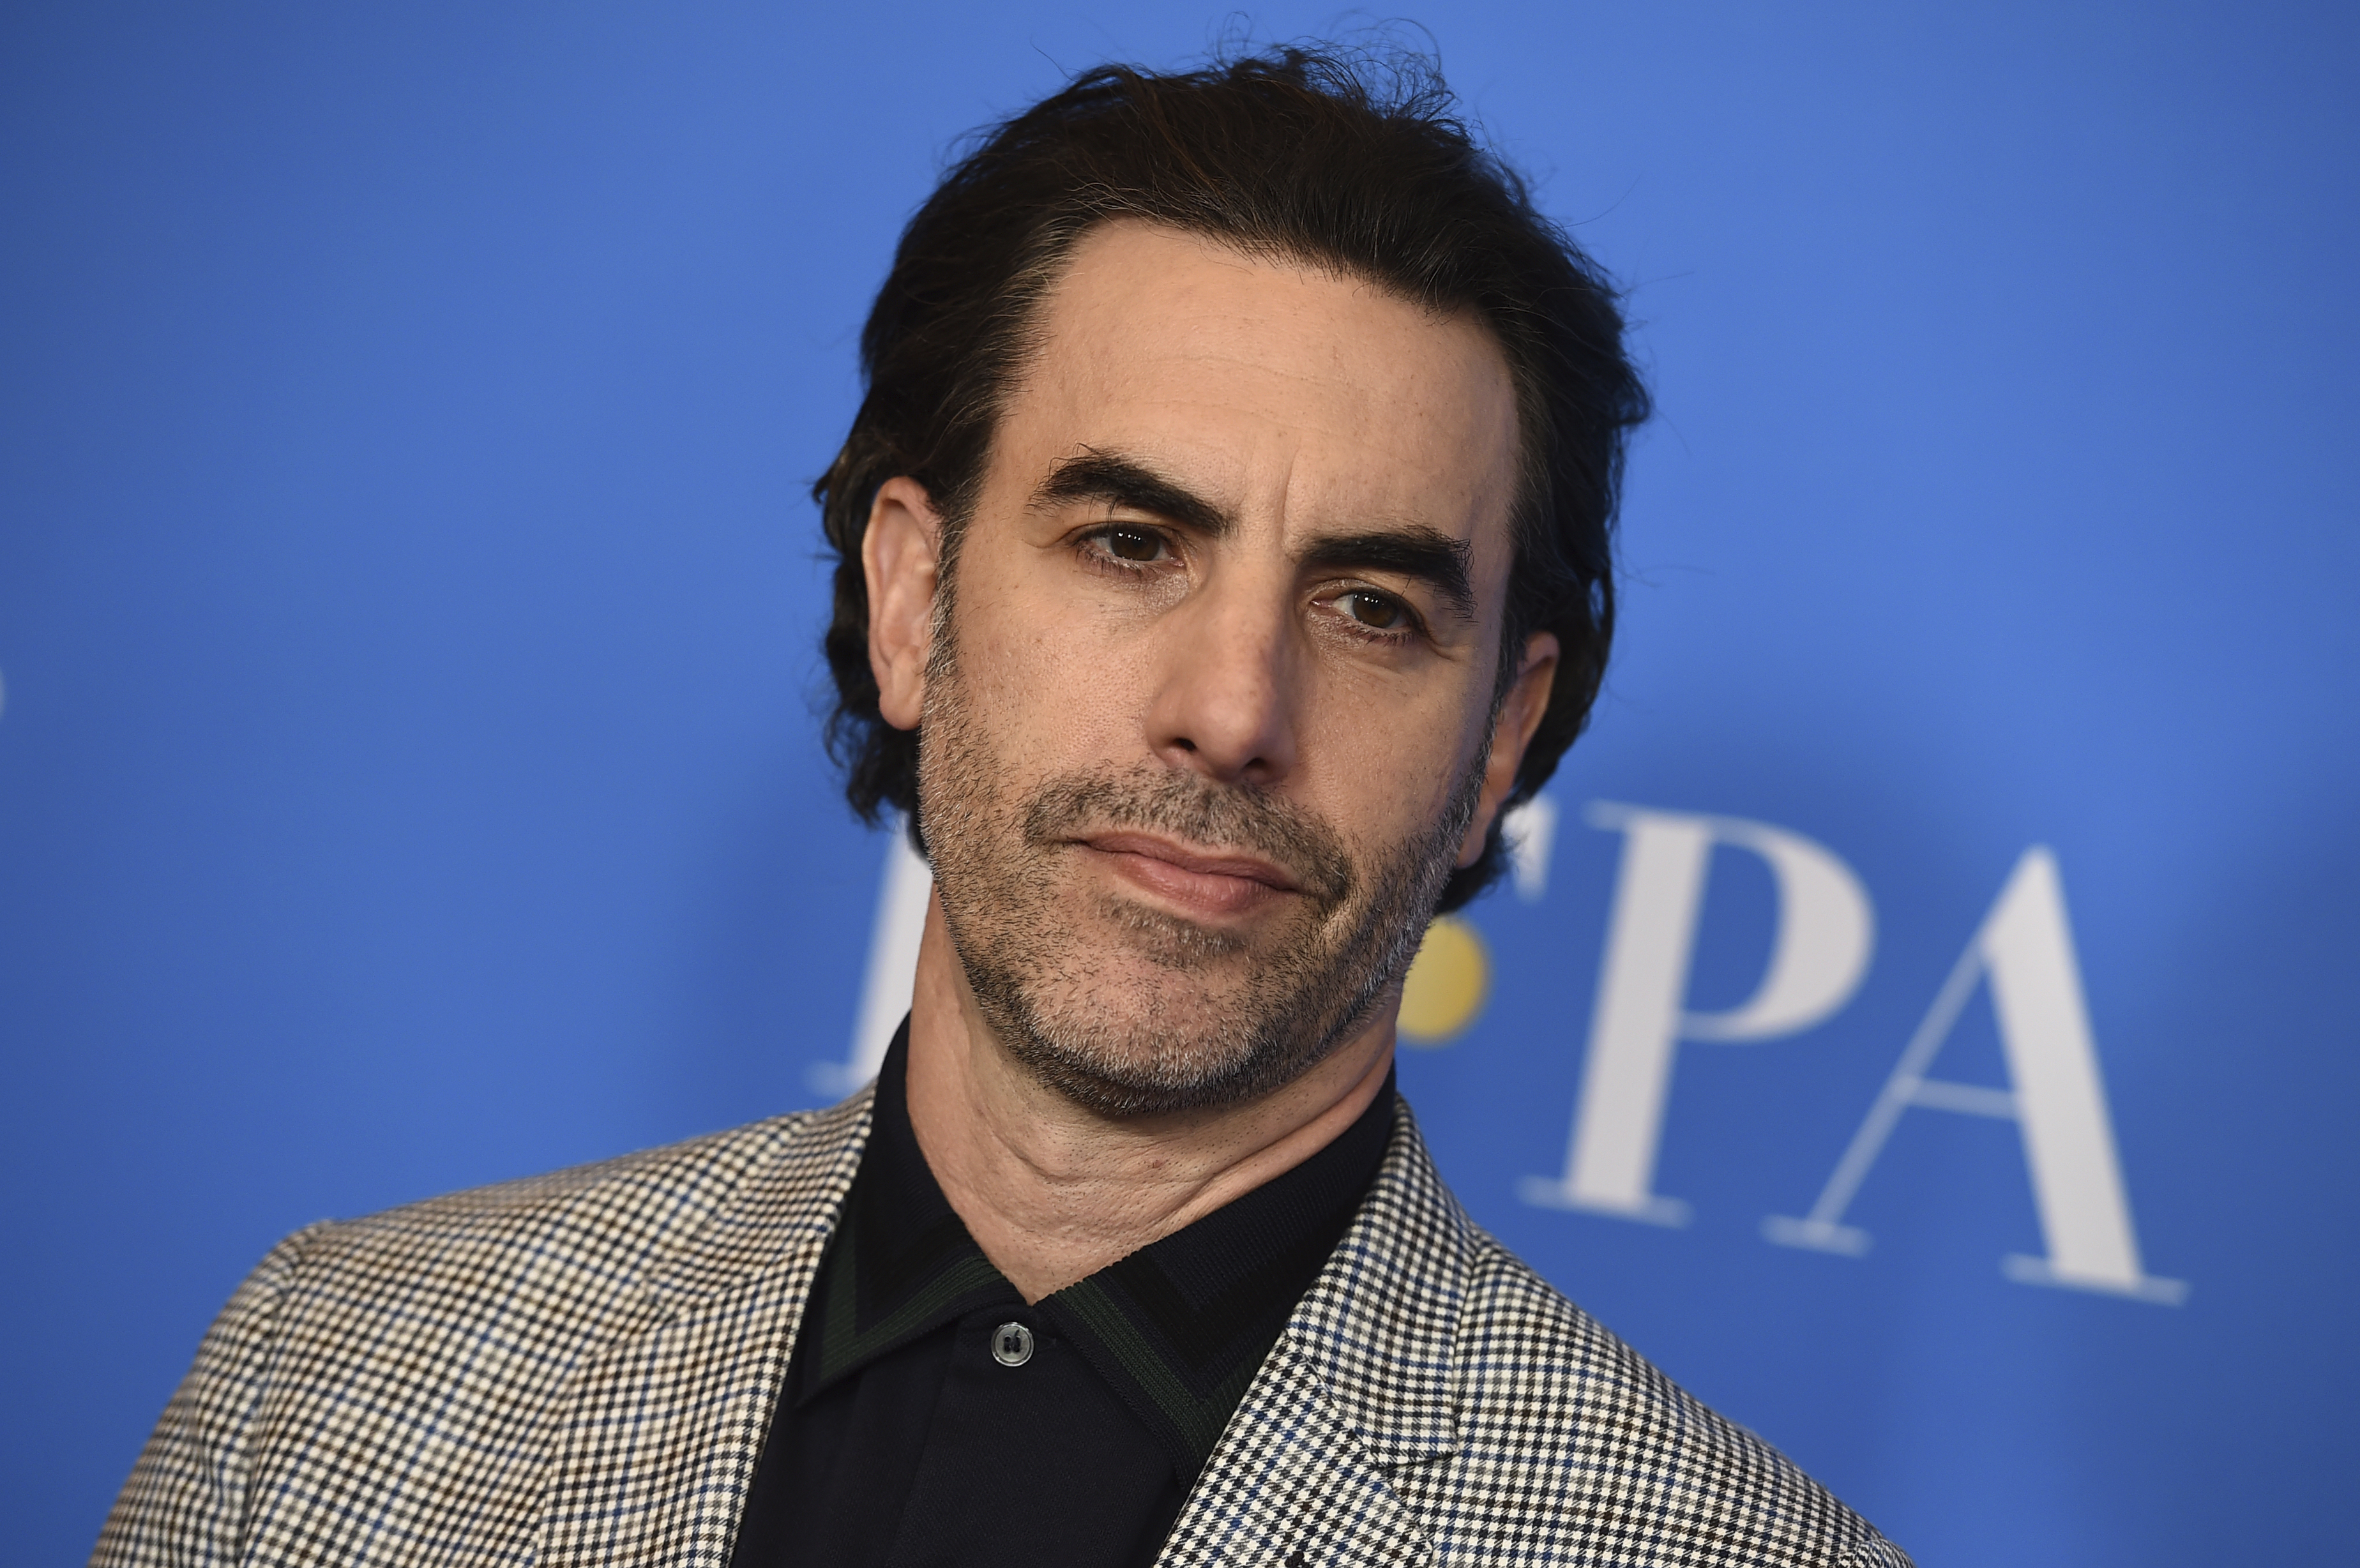 Isla has just split from actor Sacha Baron Cohen after 13 years